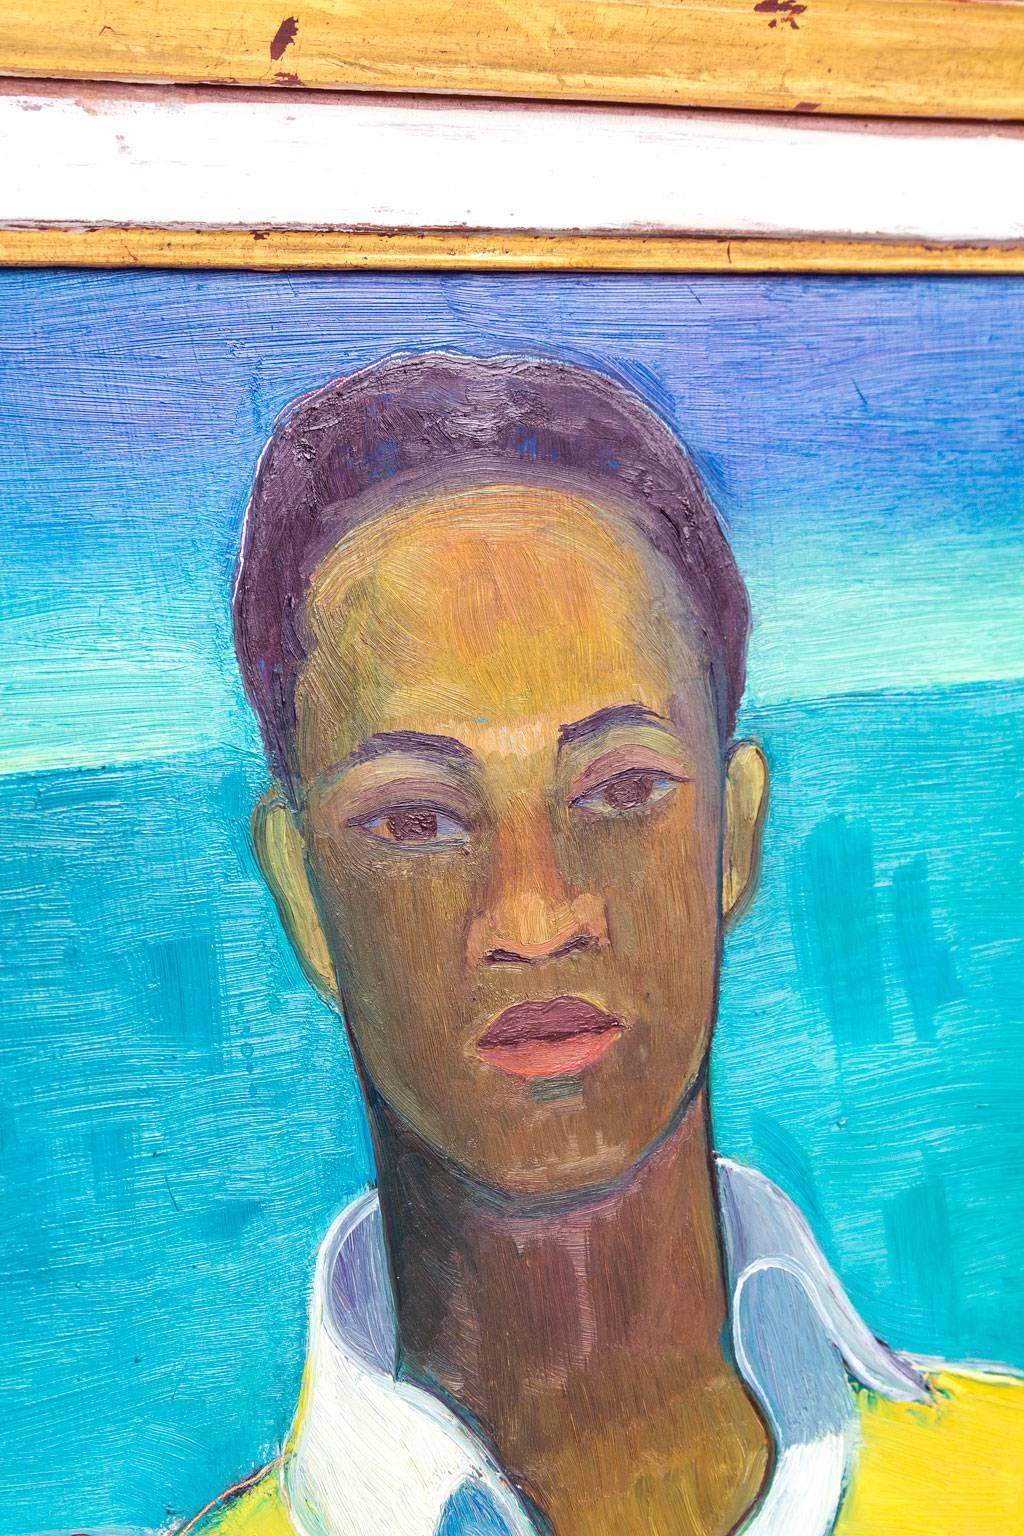 An oil painting by Arne Siegfried (Lucerne 1893-Schaffhausen 1985) of a young black man sitting on a chair with the sea in the background. A very captivating image and composition painted with bright yellow and spectacular shades of blue. Signature